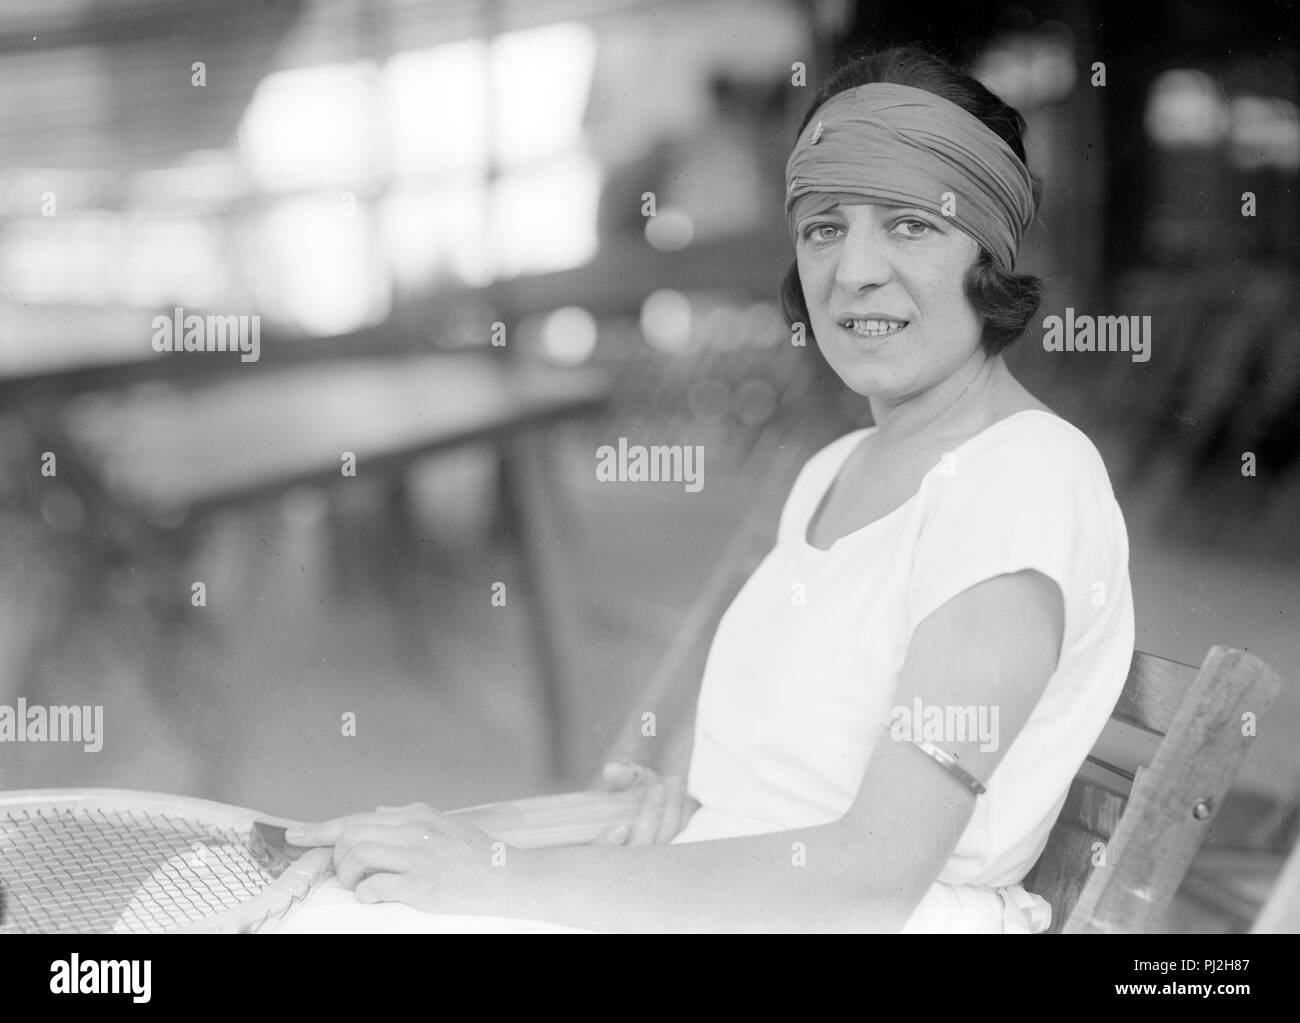 Suzanne Rachel Flore Lenglen (1899 – 1938) French tennis player who won 31 Championship titles between 1914 and 1926. Stock Photo